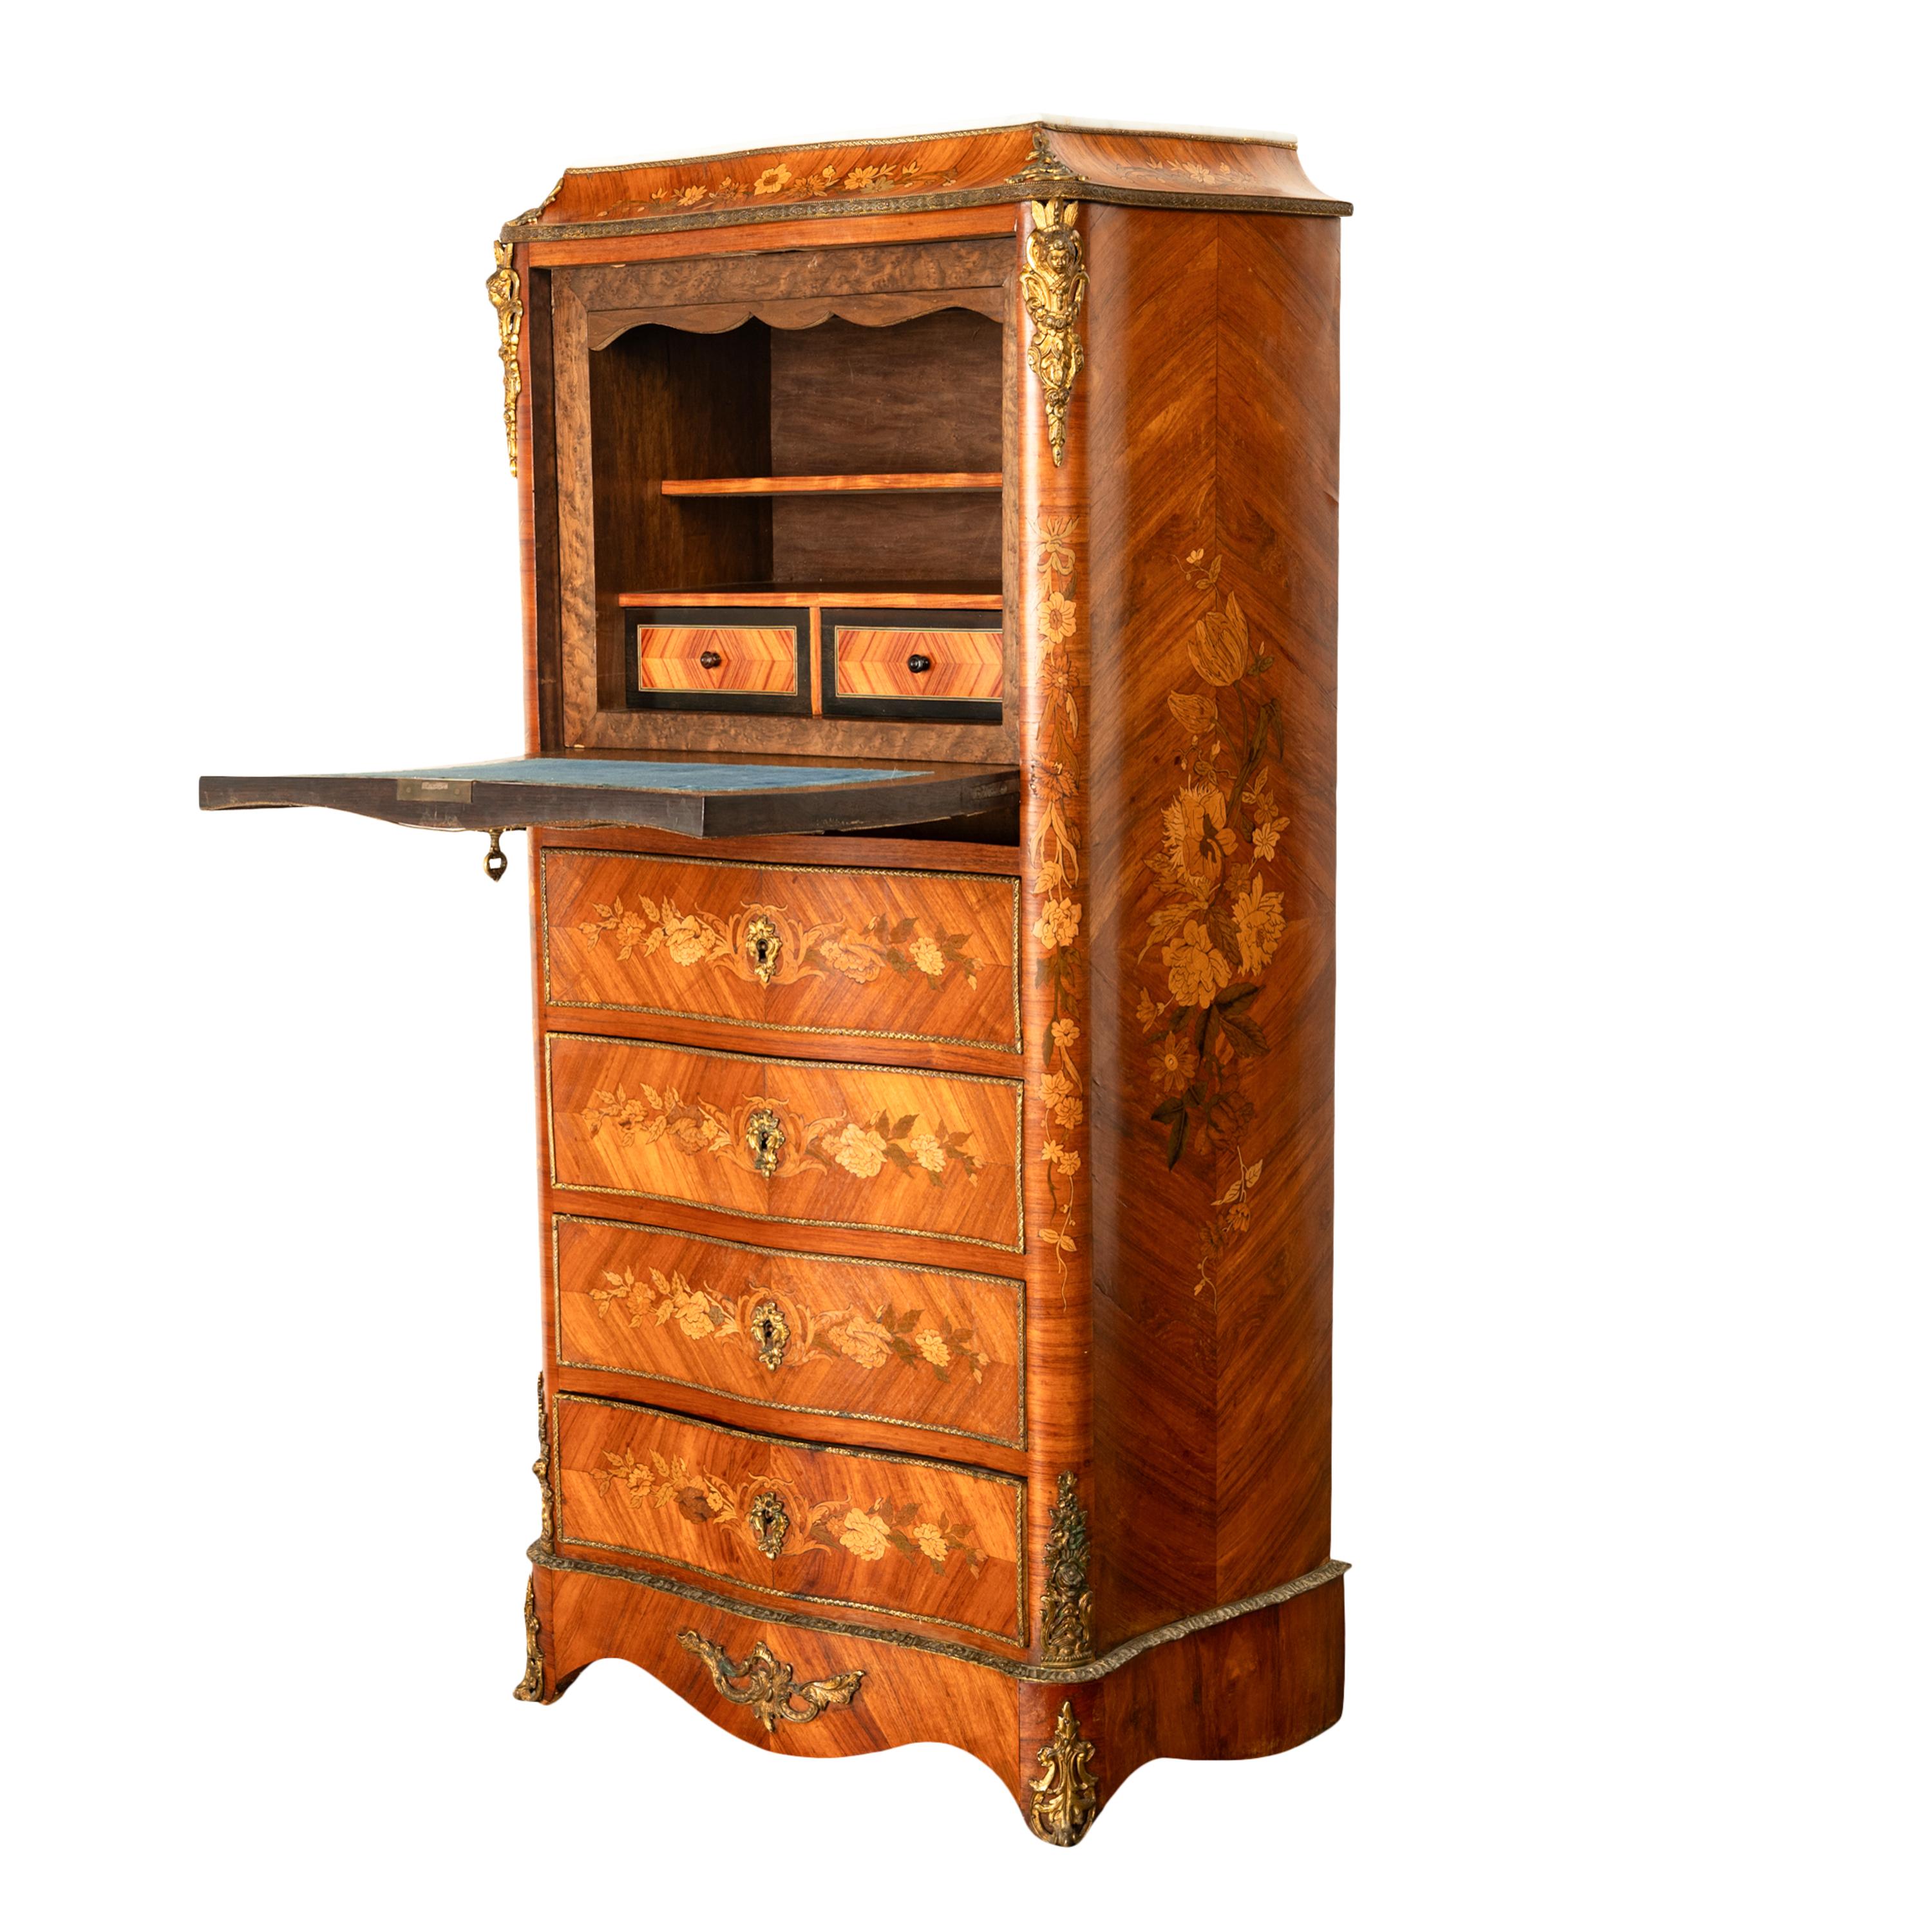 A very fine quality antique French Louis XV rosewood, marquetry, ormolu and marble topped secretaire abattant, circa 1880.
The serpentine shaped secretary is modeled as a semainier ( seven drawer chest), the feather-banded rosewood case is